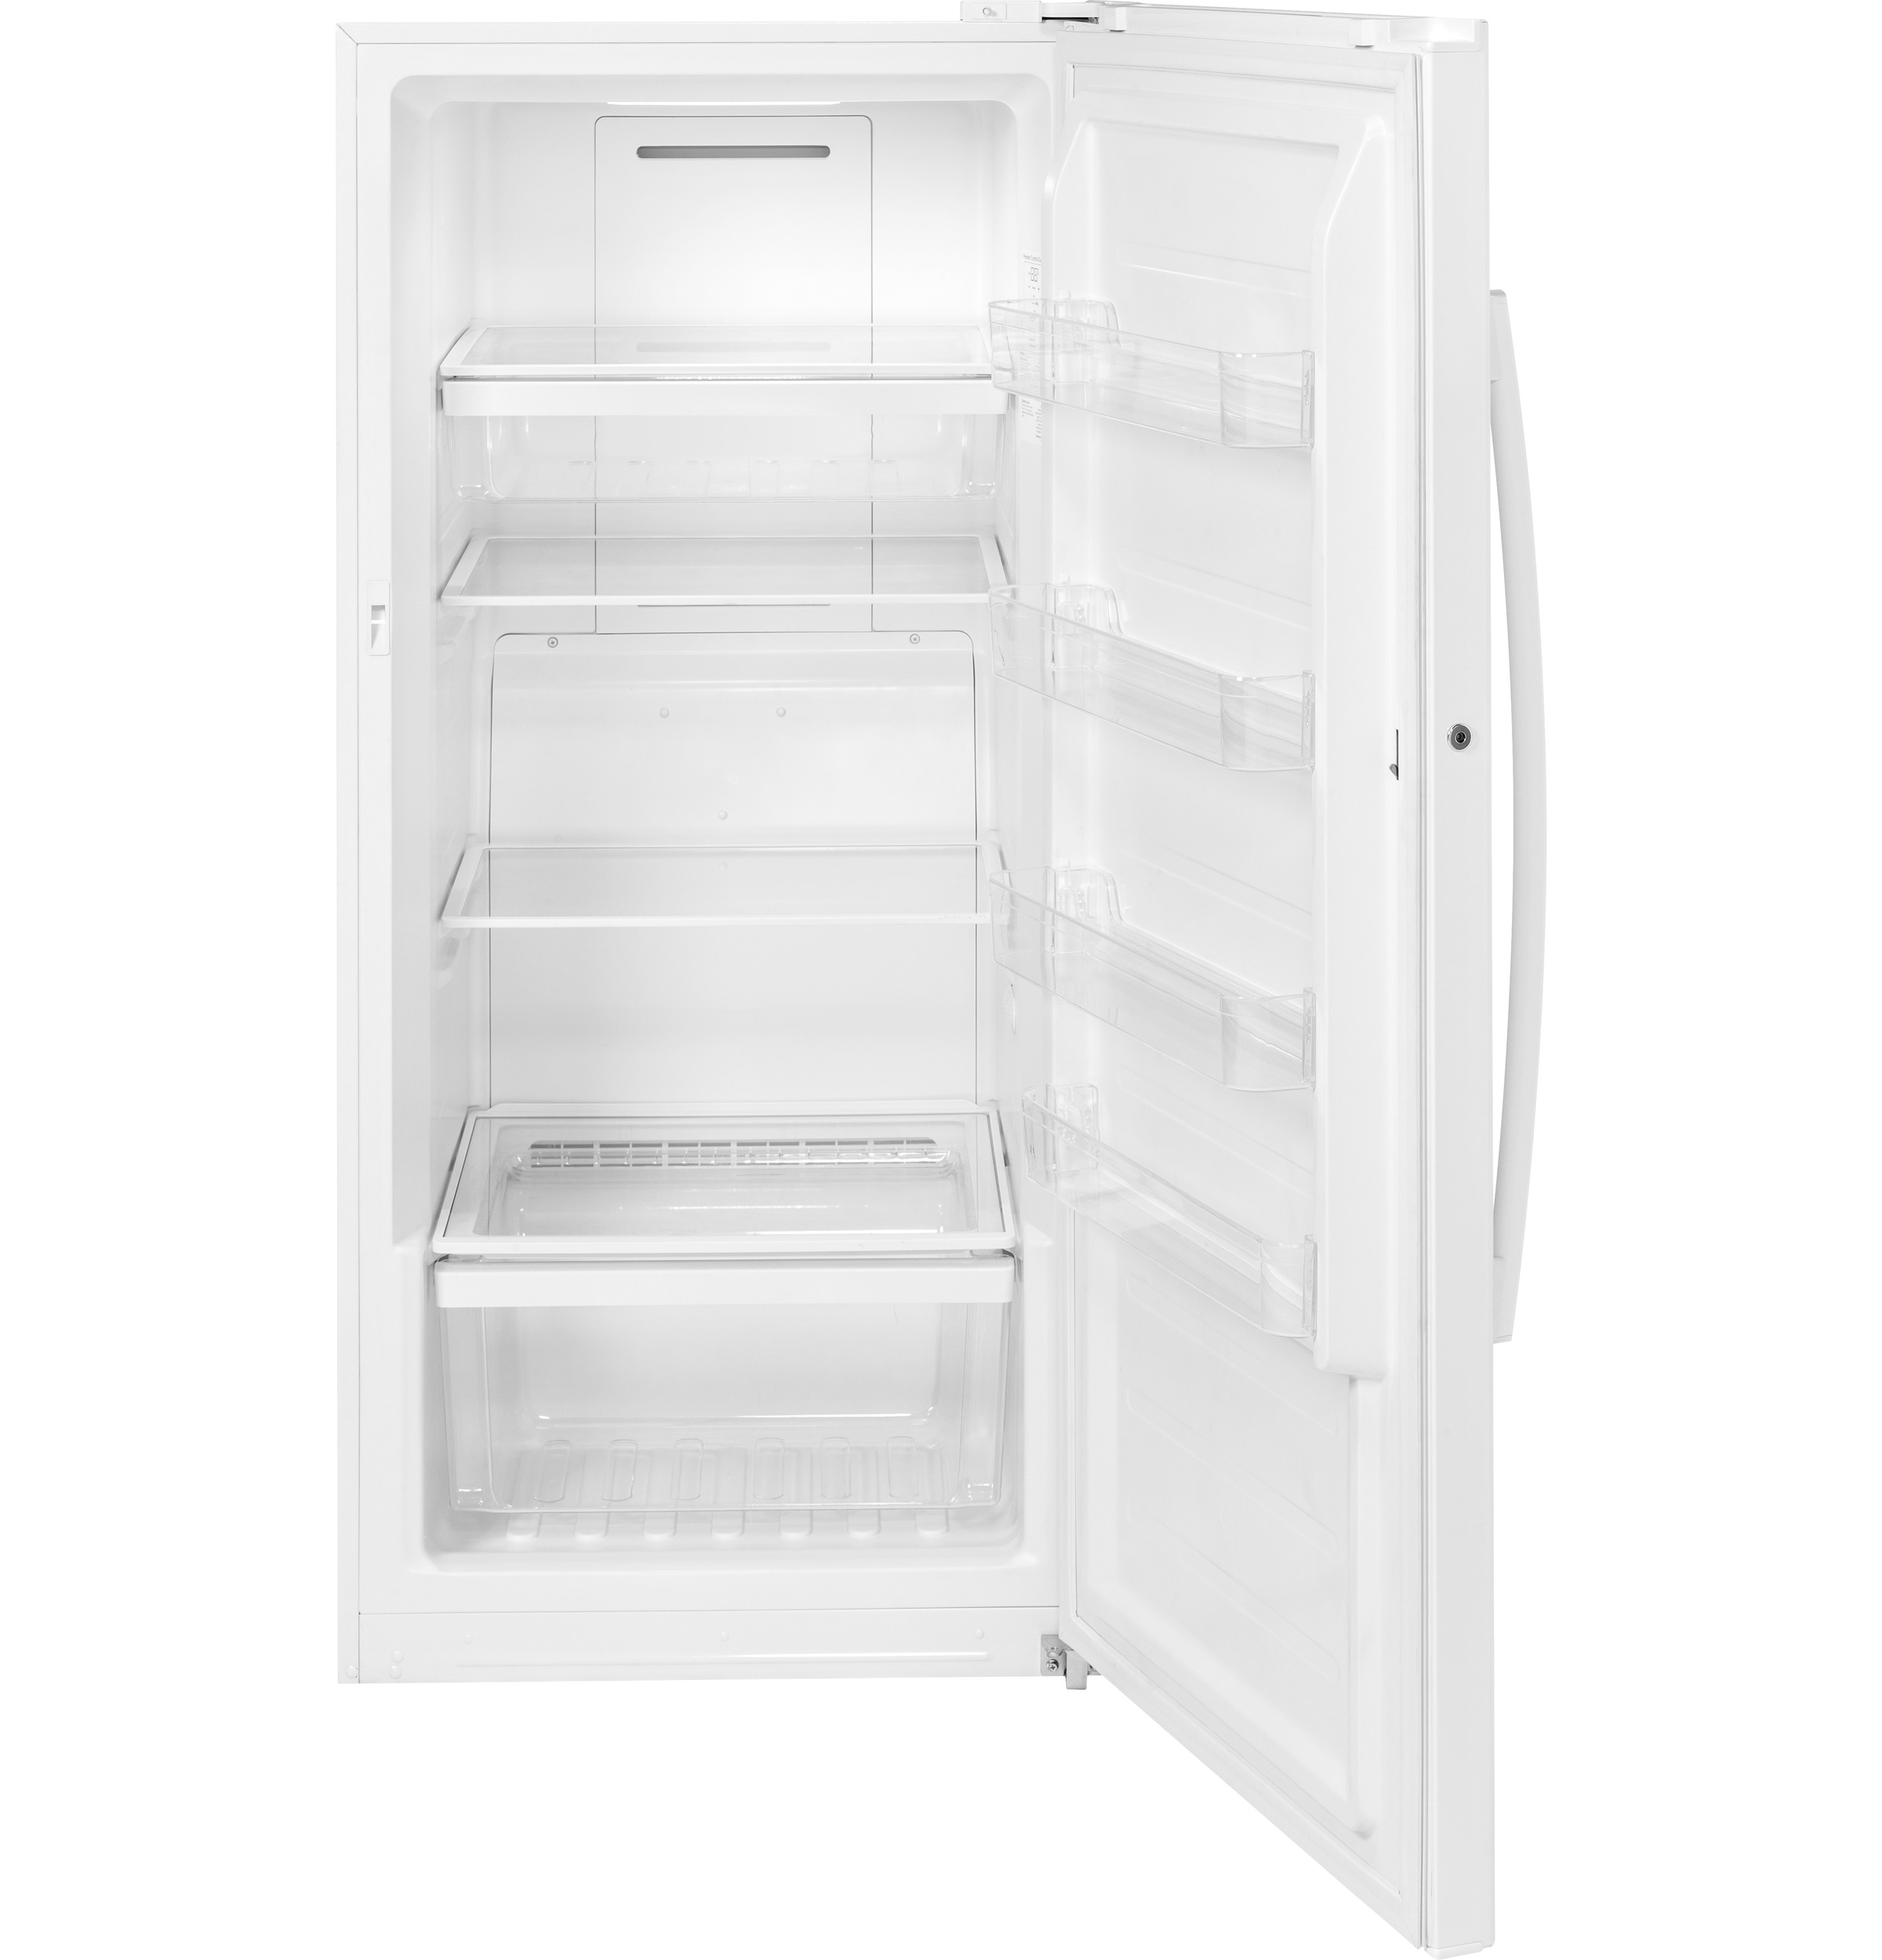 Smooth Gliding: Tips For Easier Opening Of GE Freezer Drawer